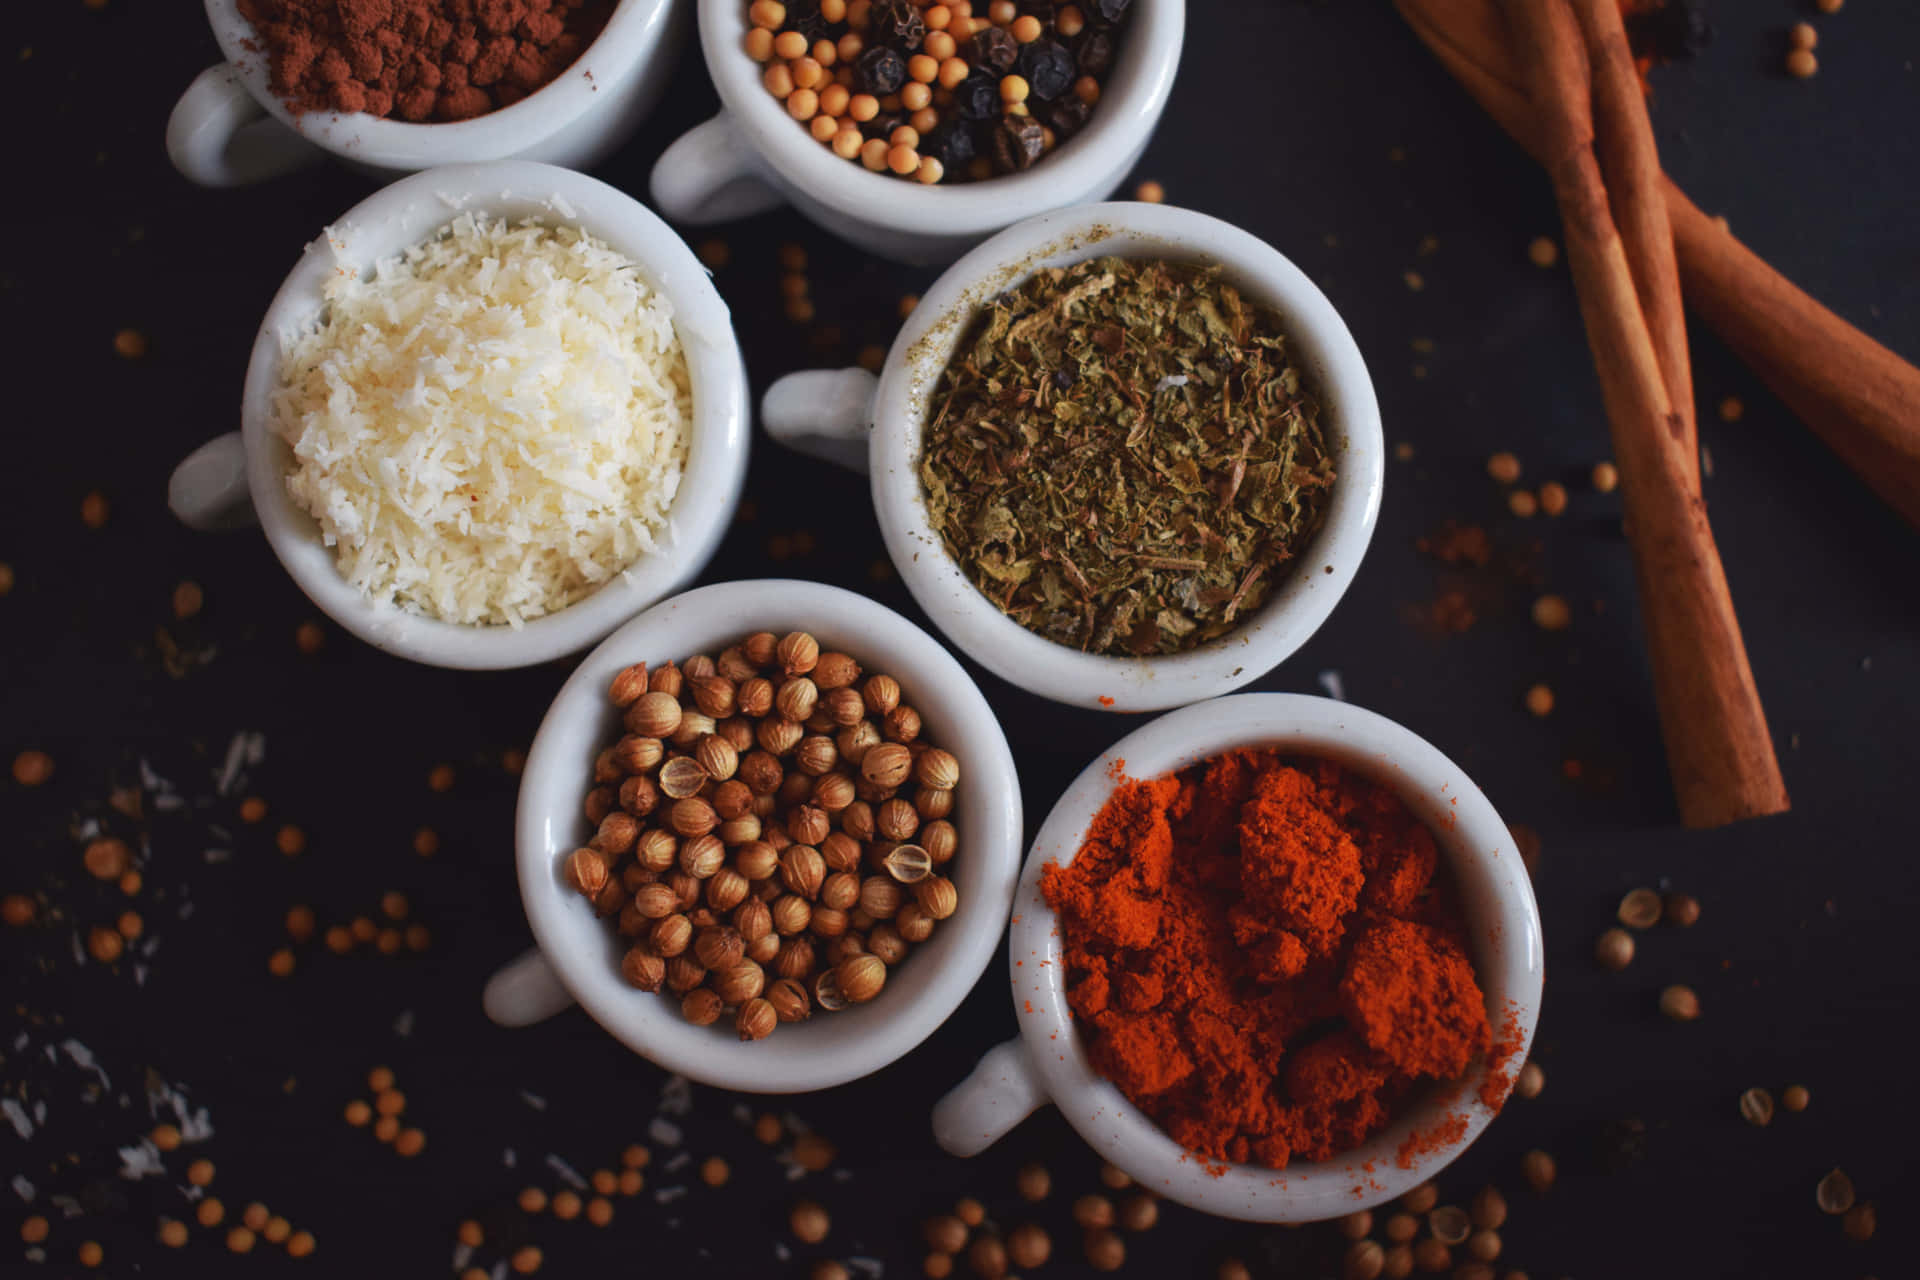 Spices In Bowls On A Dark Background